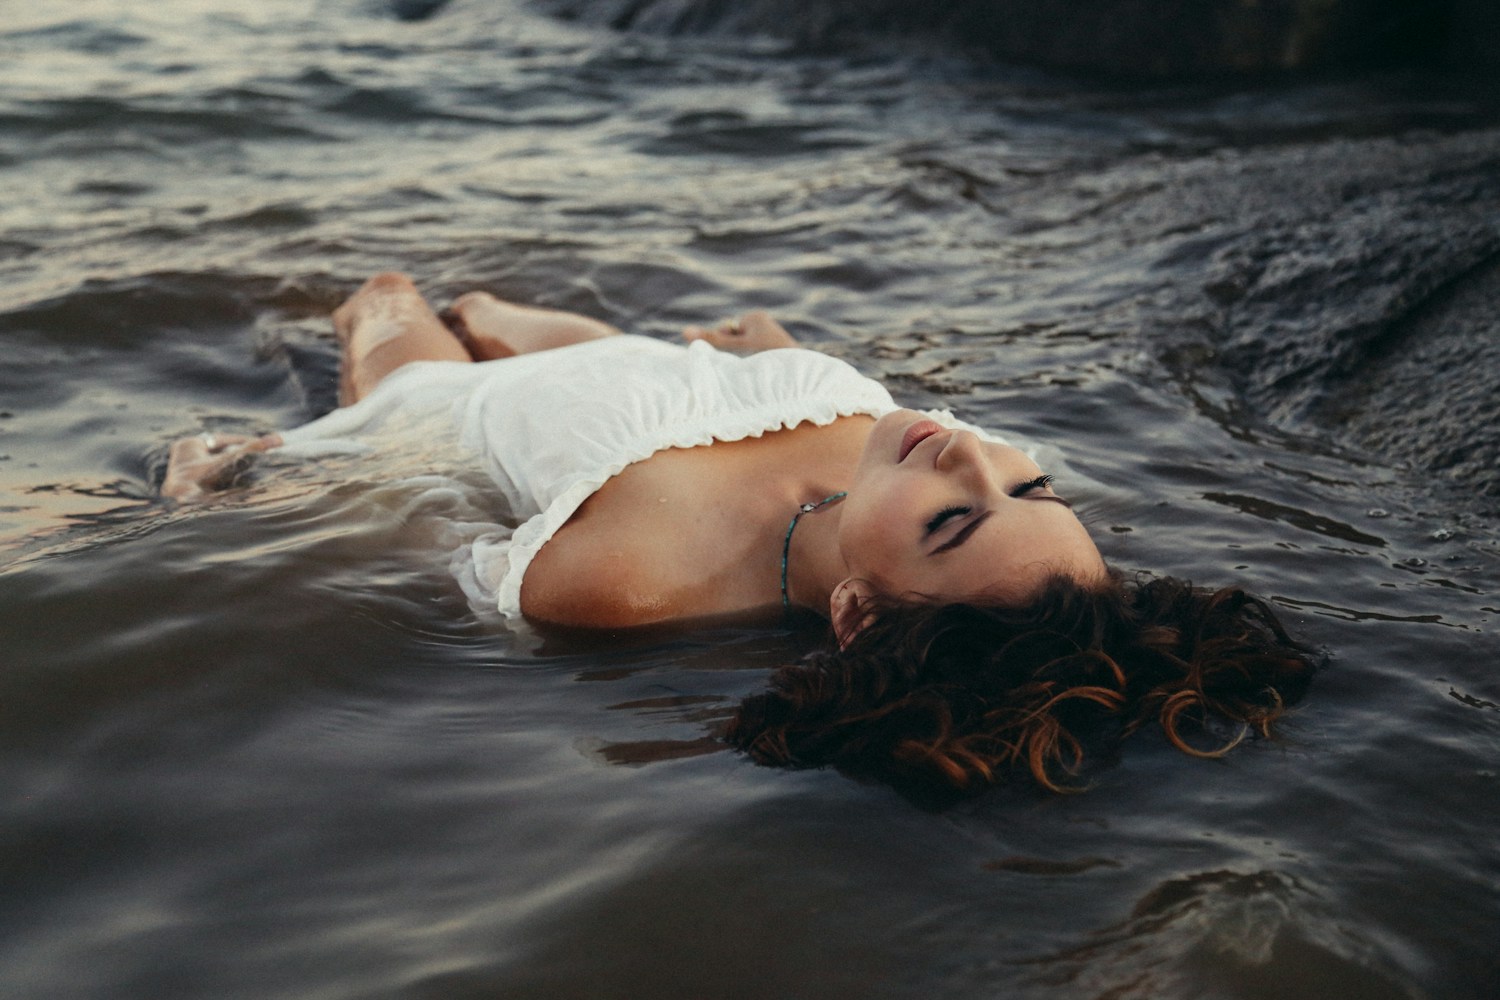 A woman in a white dress floating on her back in water.